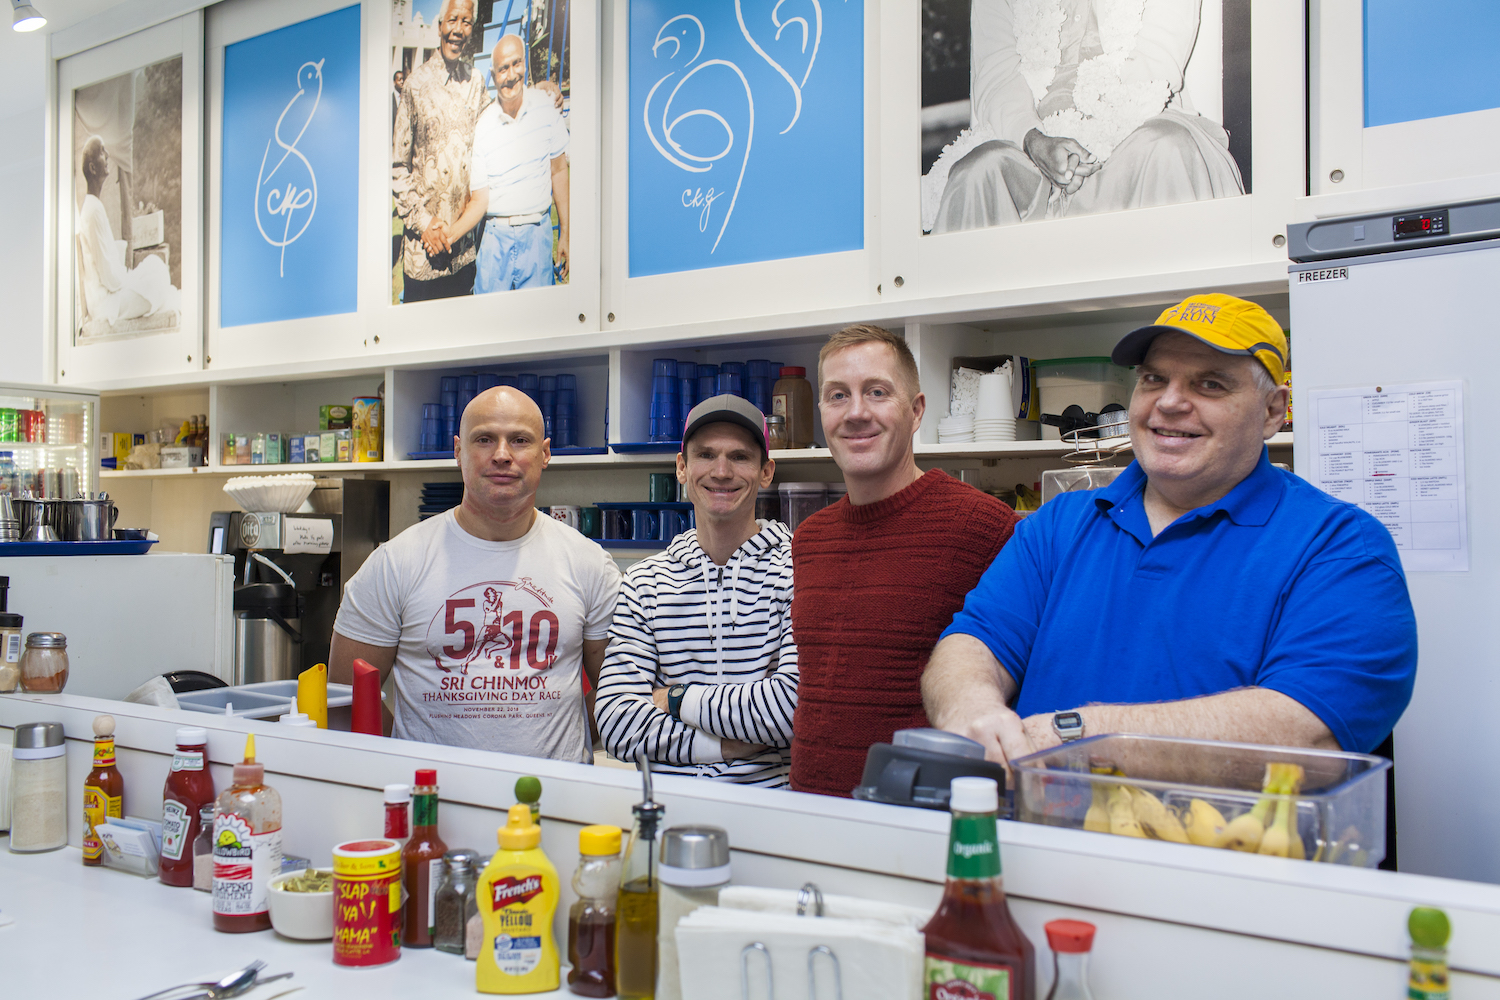 Smile of the Beyond, opened in 1972, is Queens's oldest diner focusing on vegetarian cuisine.